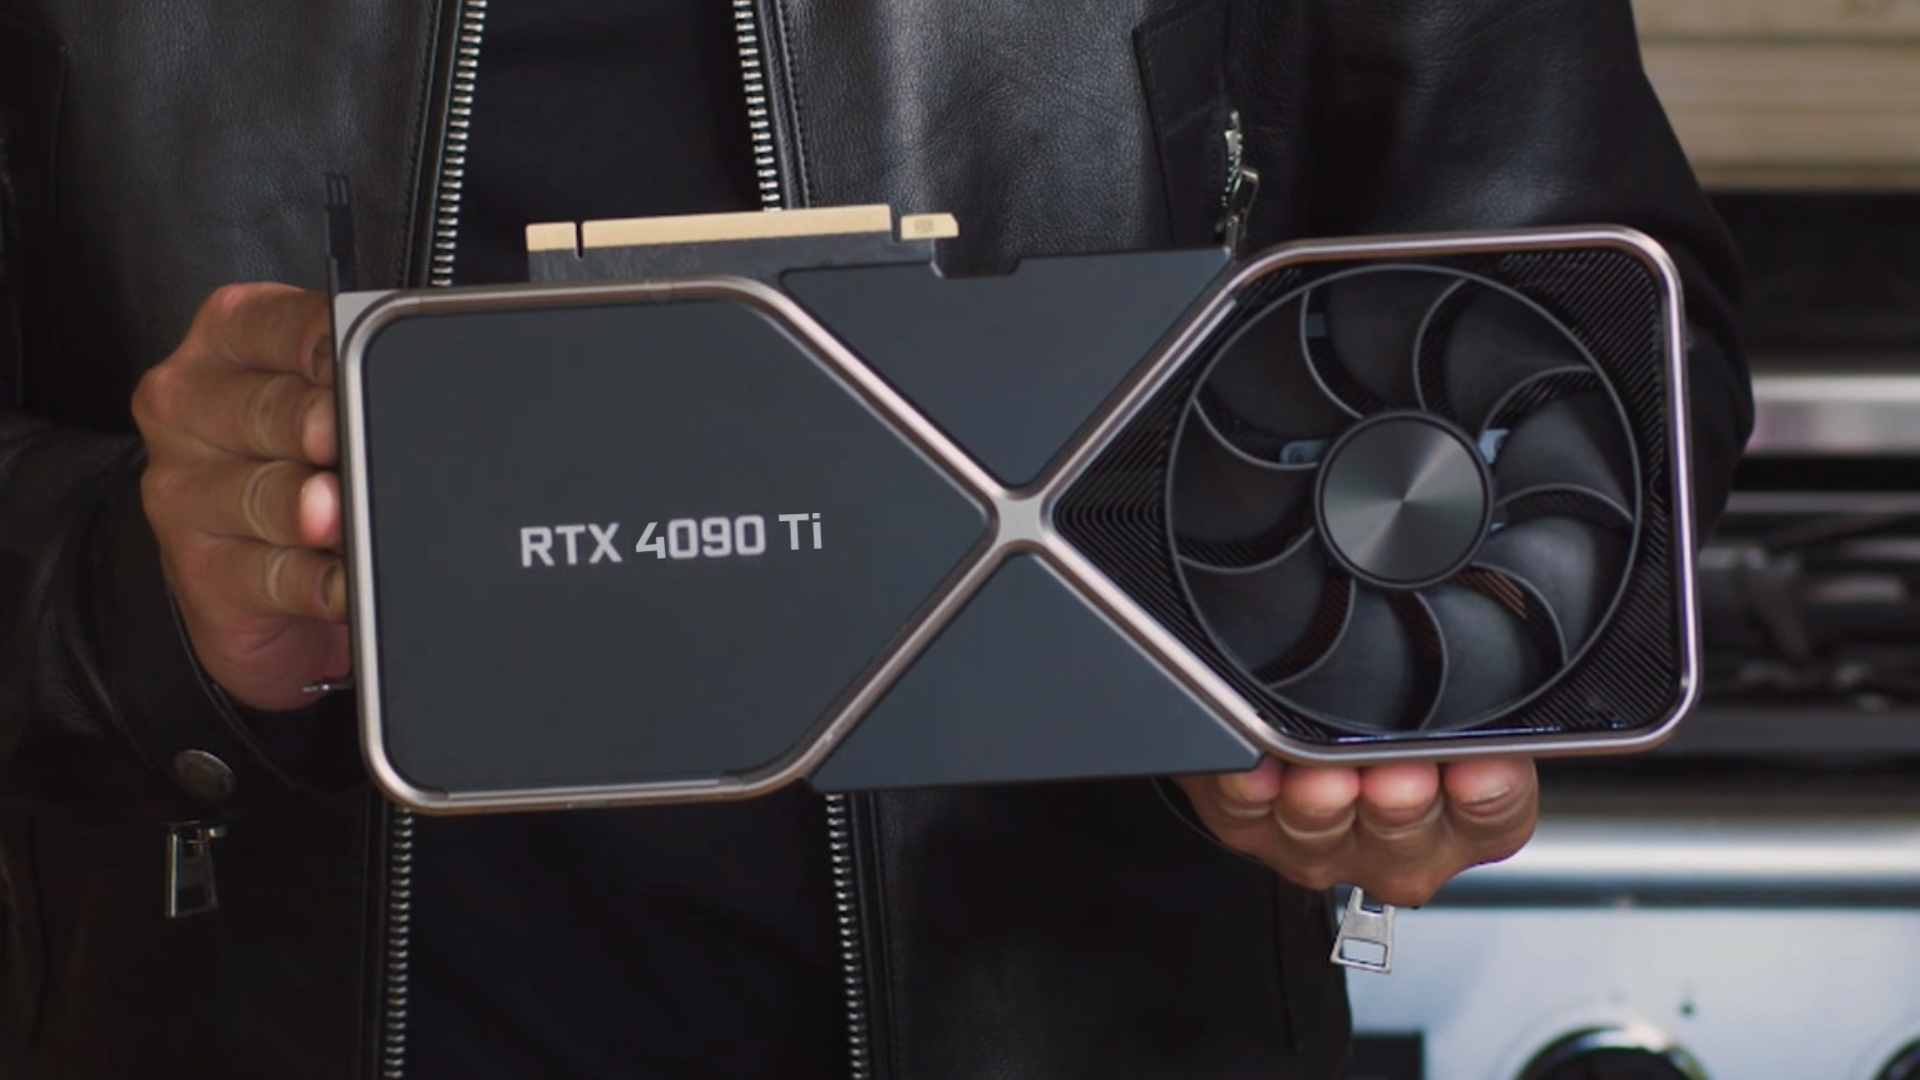 nvidia-rtx-4090-ti-gpu-with-46gb-vram-could-be-on-the-cards